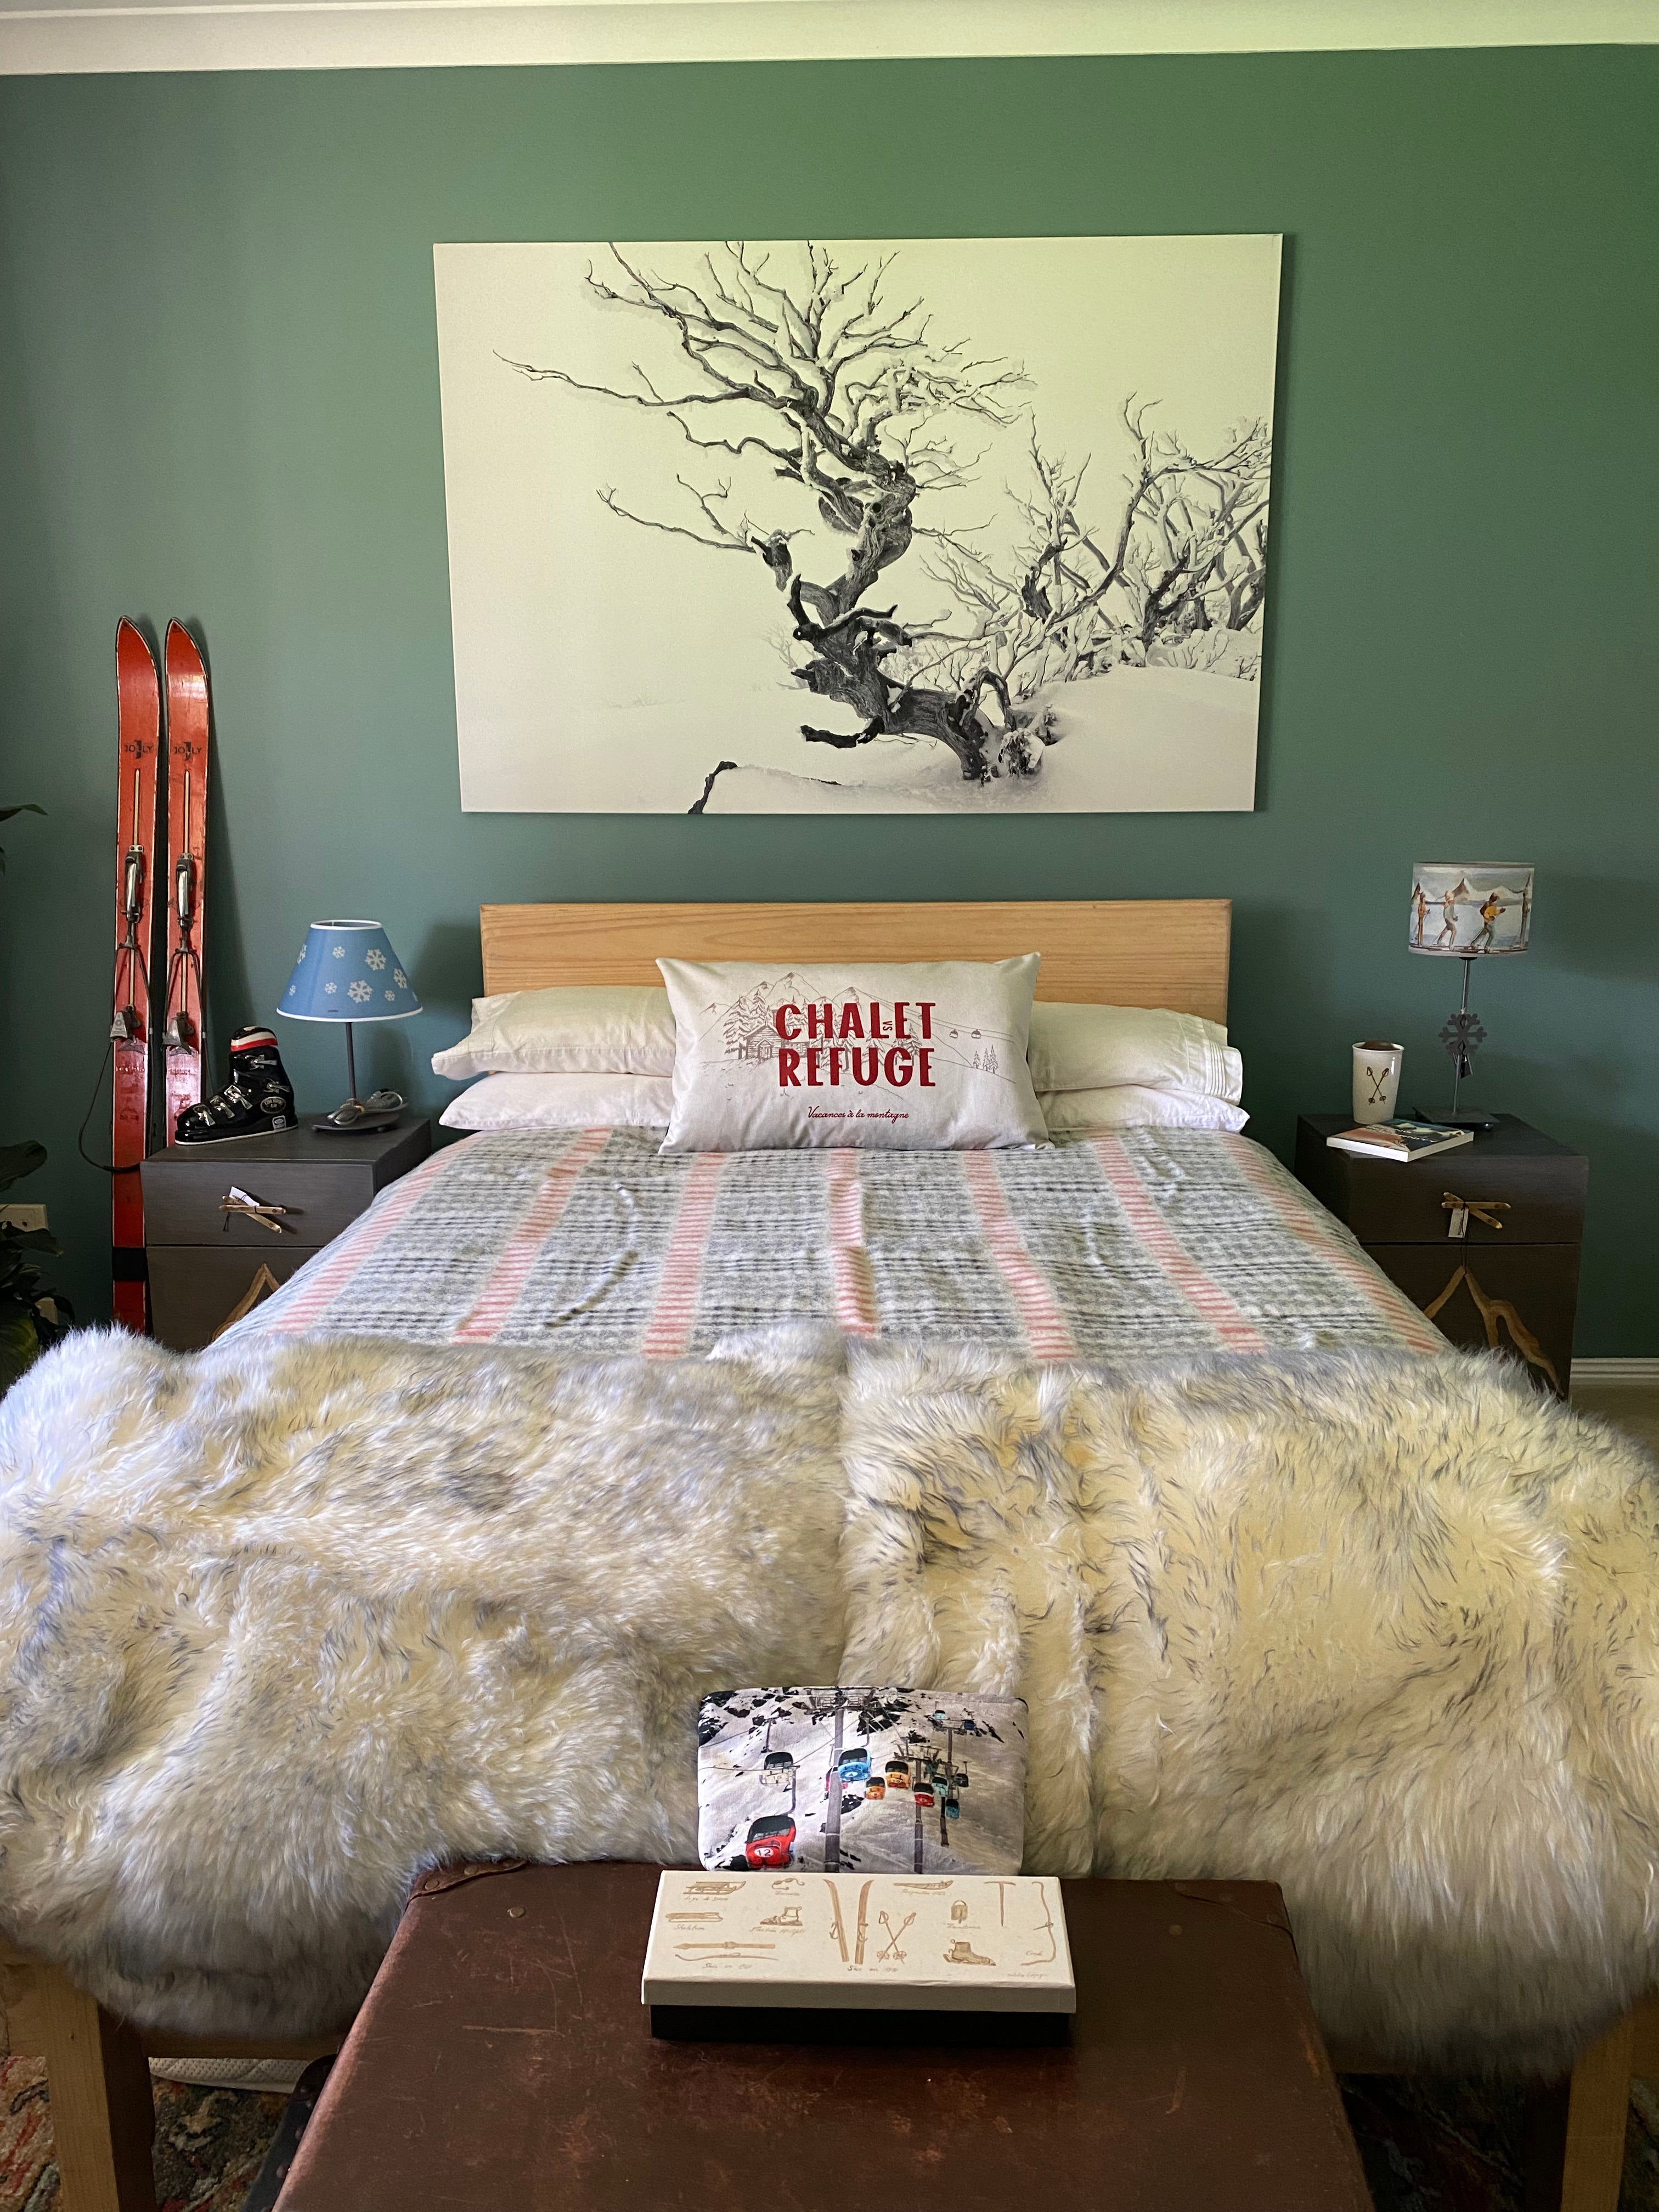 Front on view of a bedroom, with the Snowflake lamp on the right hand bedside table. Room painted green, with vintage suitcases at the end of the bed and vintage orange skis leaning against the wall. Grey, red & white blanket on bed & 1 throw cushion